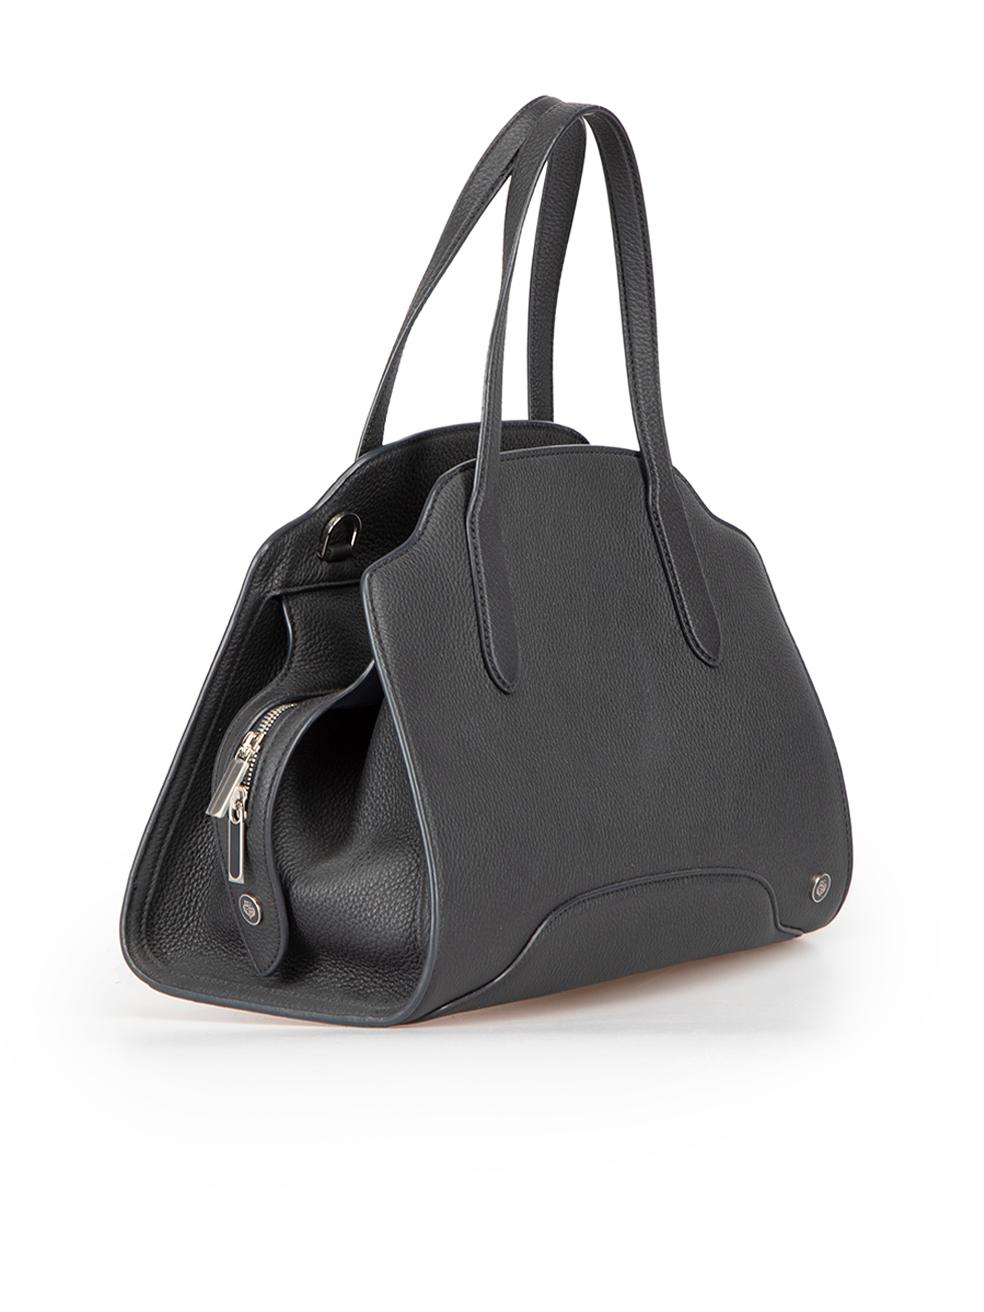 CONDITION is Very good. Hardly any visible wear to bag is evident on this used Loro Piana designer resale item.
 
Details
Micro Sesia
Black
Leather
Mini handbag
2x Top handles
1x Main zipped compartment
1x Internal slip pocket
1x Internal zip